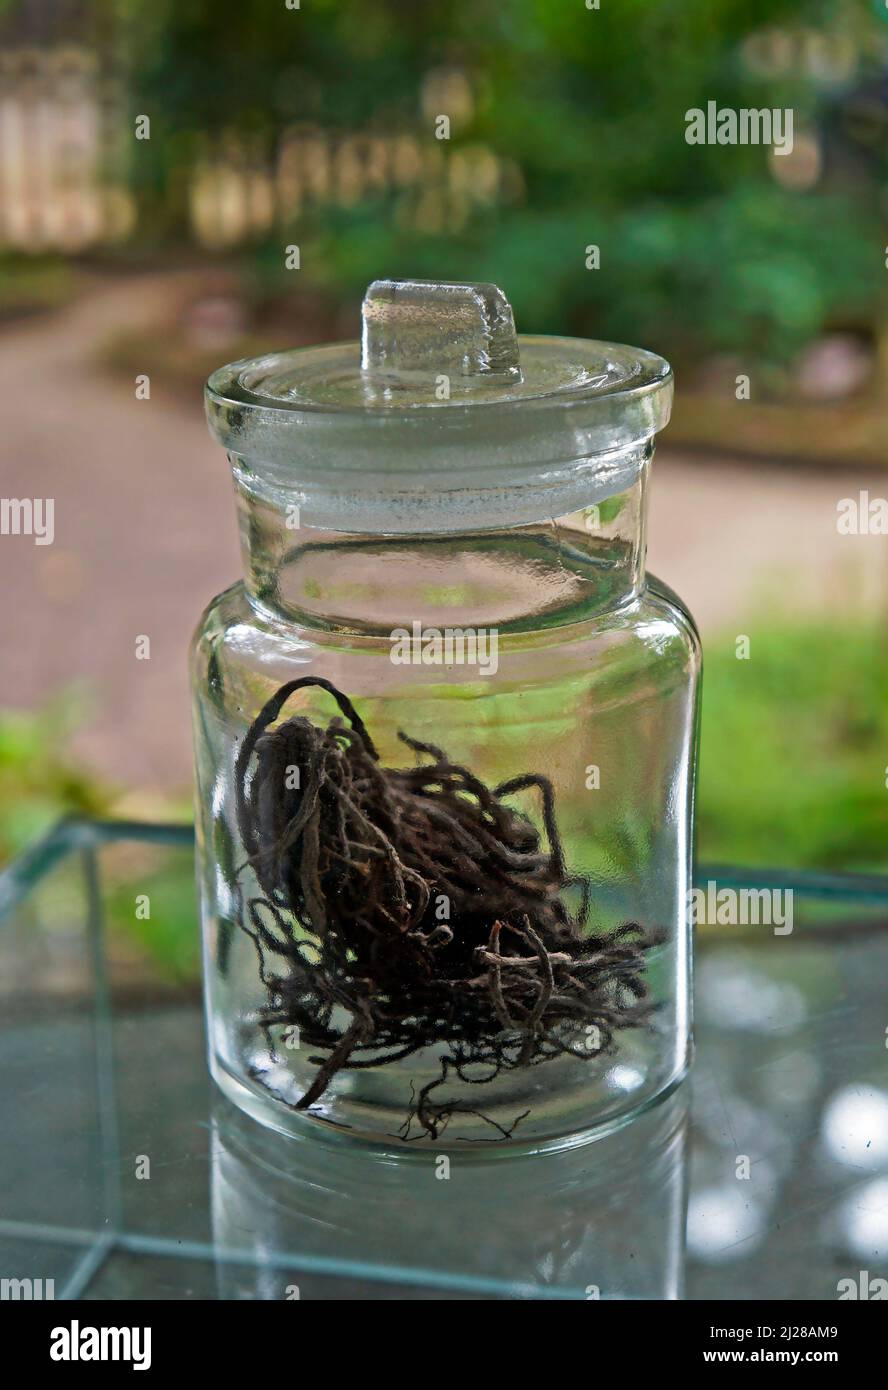 Glass jar containing dried roots Stock Photo